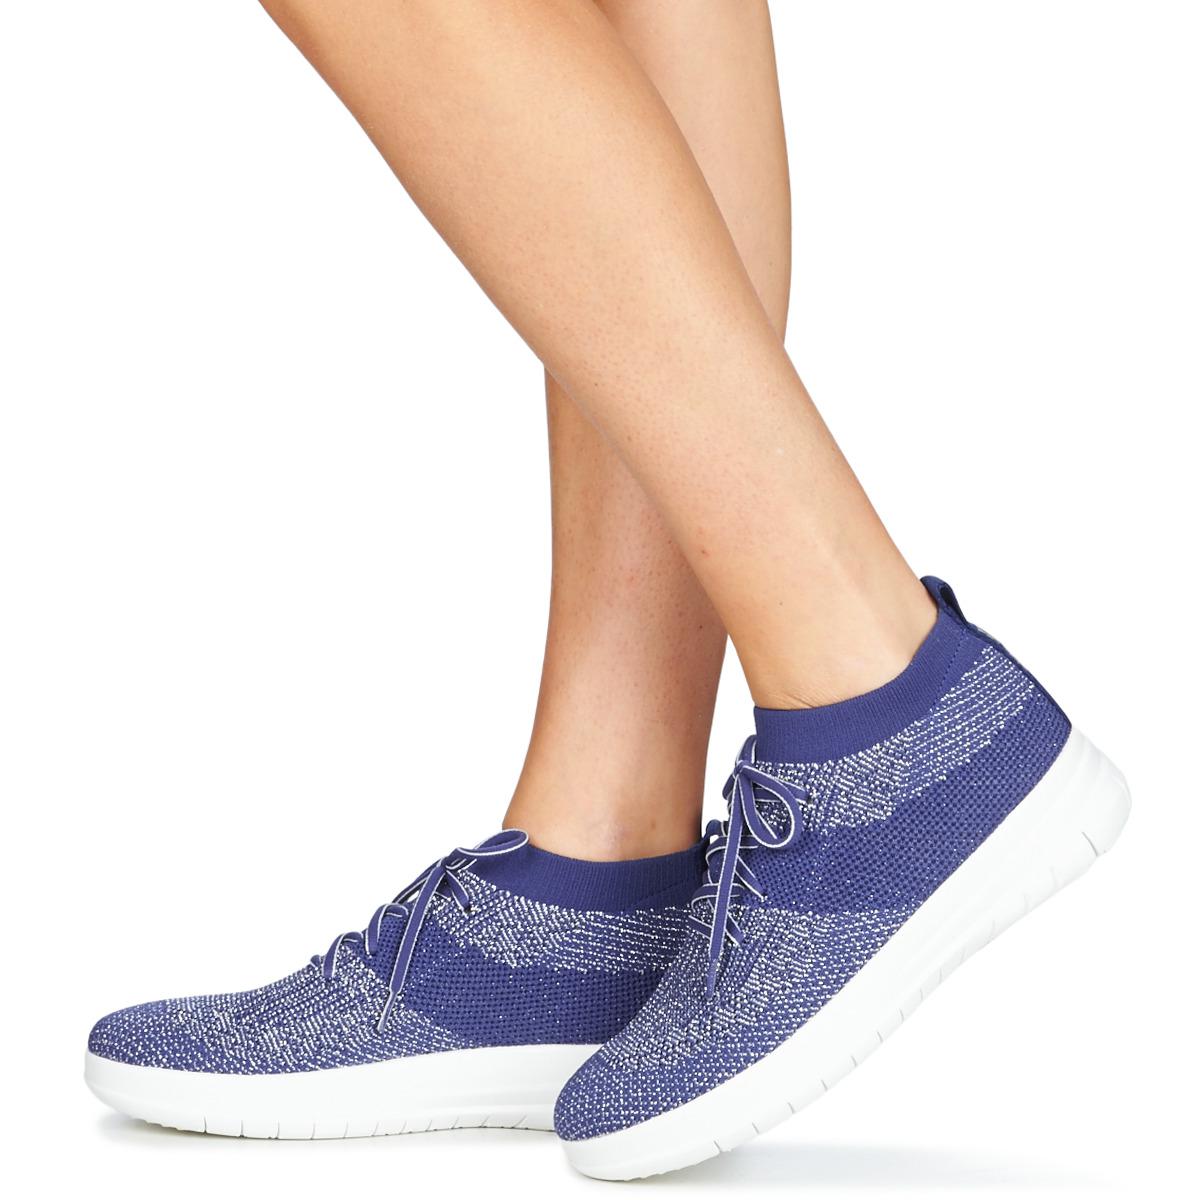 fitflop high top sneakers,yasserchemicals.com